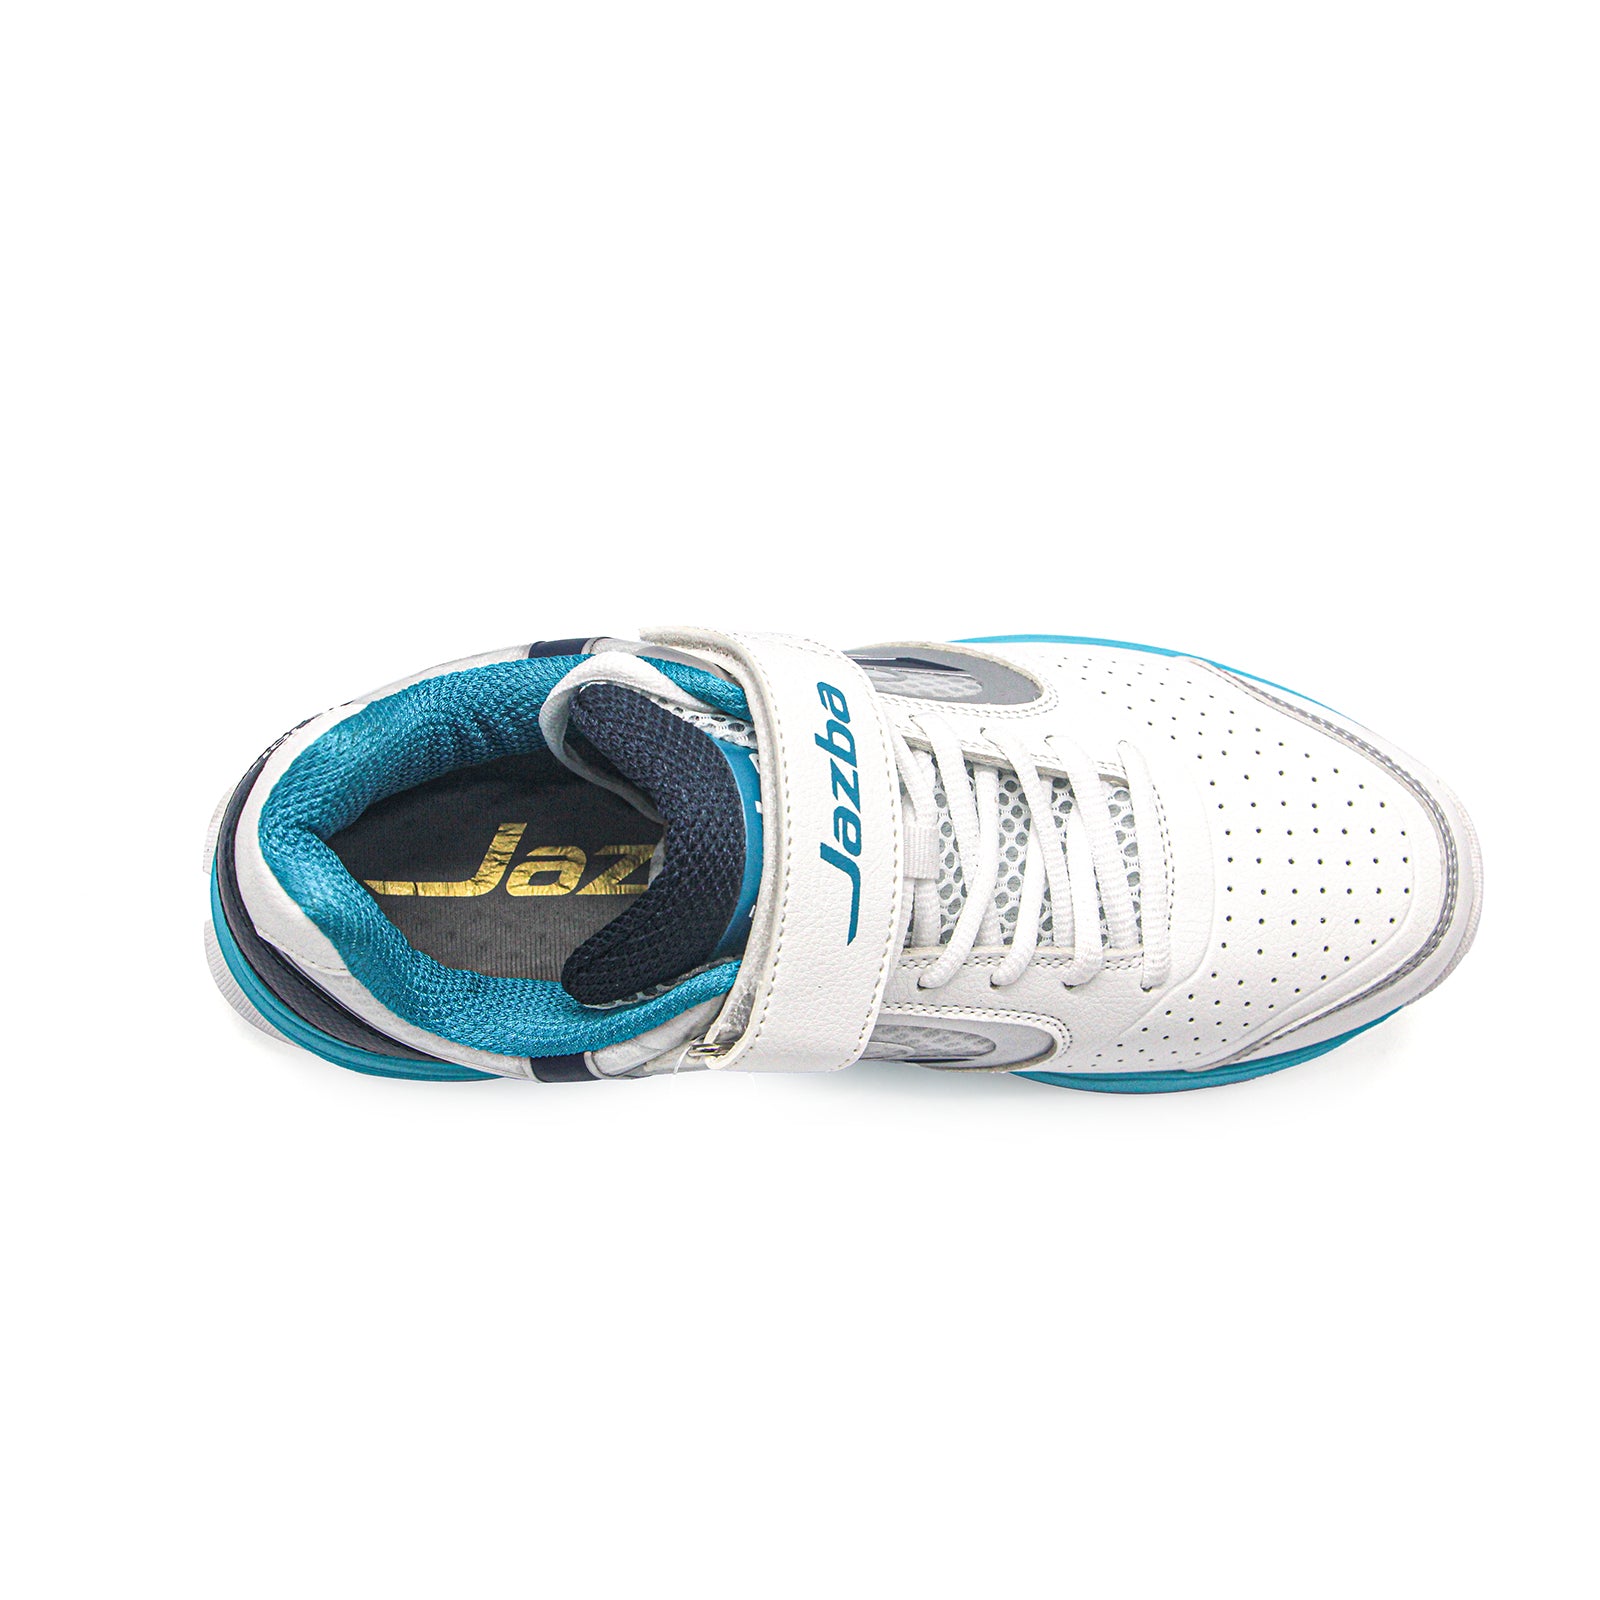 JAZBA RUBBER CRICKET SHOES SKY DRIVE 103 - TEAL